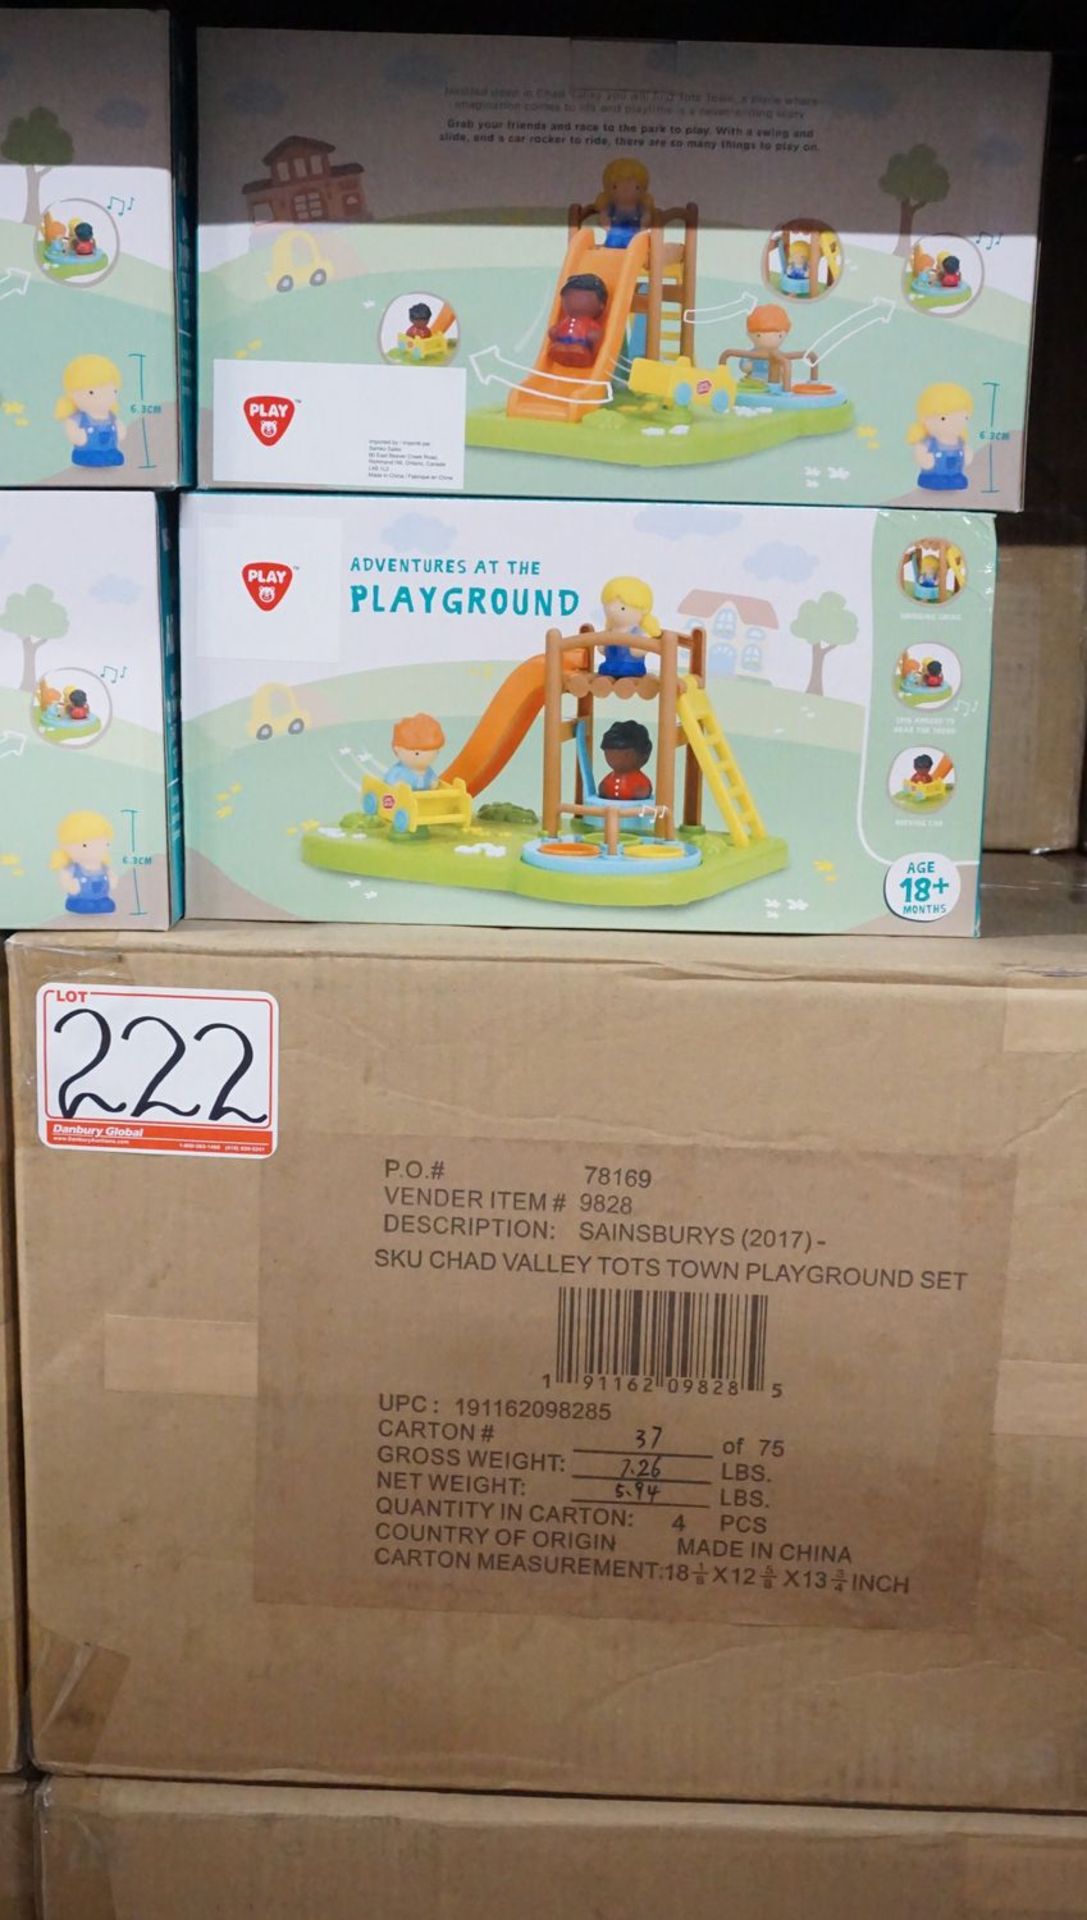 BOXES - PLAY ADVENTURES AT THE PLAYGROUND (2 PCS/BOX)